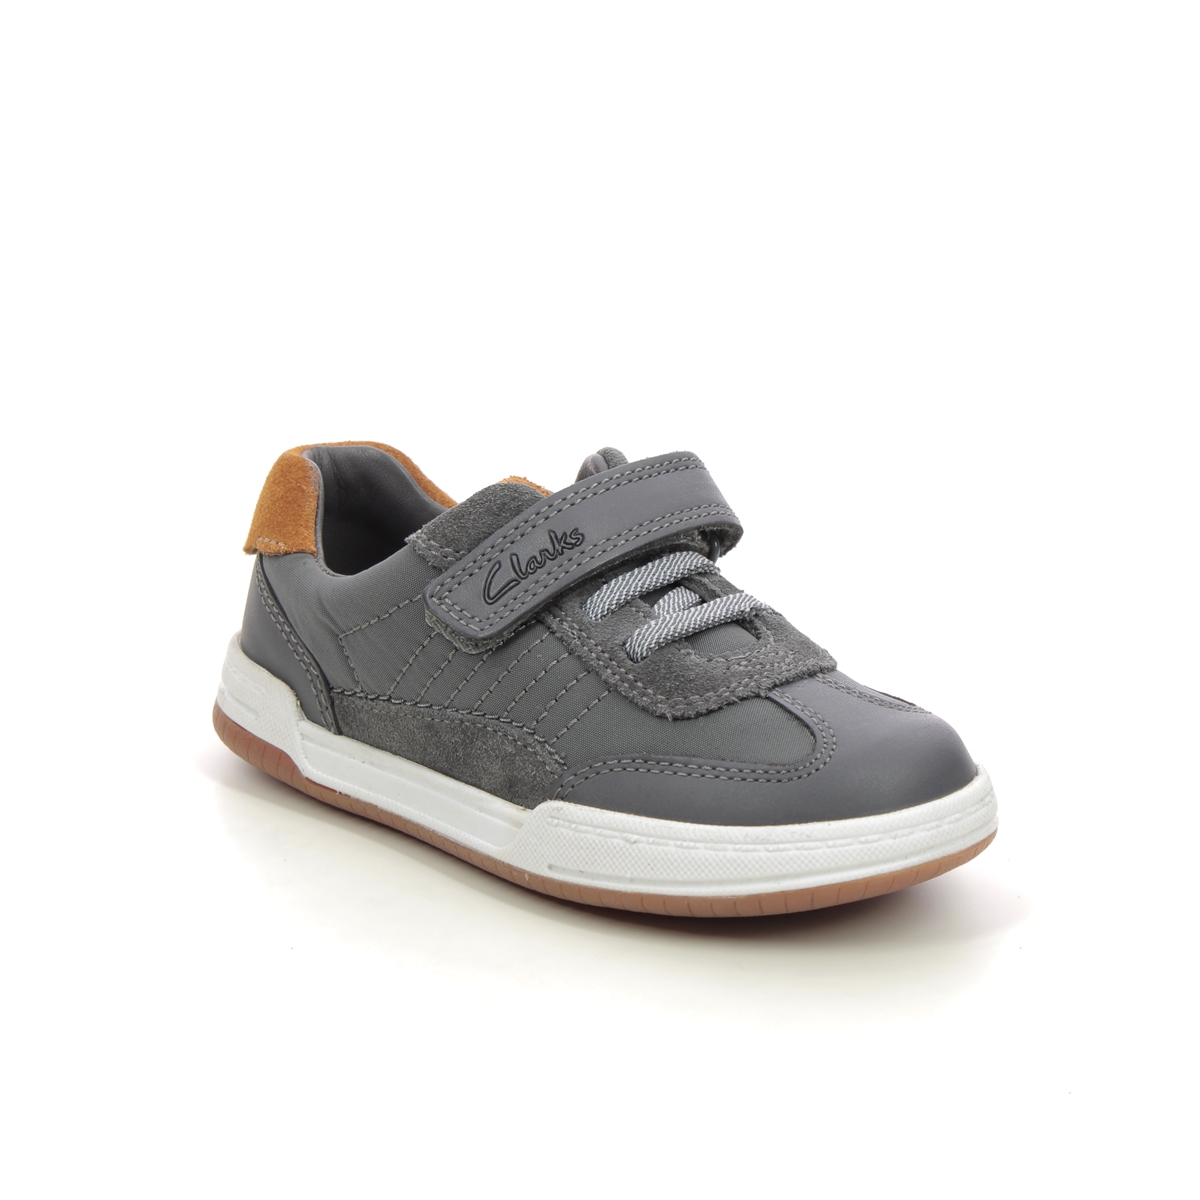 Clarks Fawn Family K Grey Leather Kids Boys Toddler Shoes 751156F In Size 7 In Plain Grey Leather F Width Fitting Regular Fit For kids